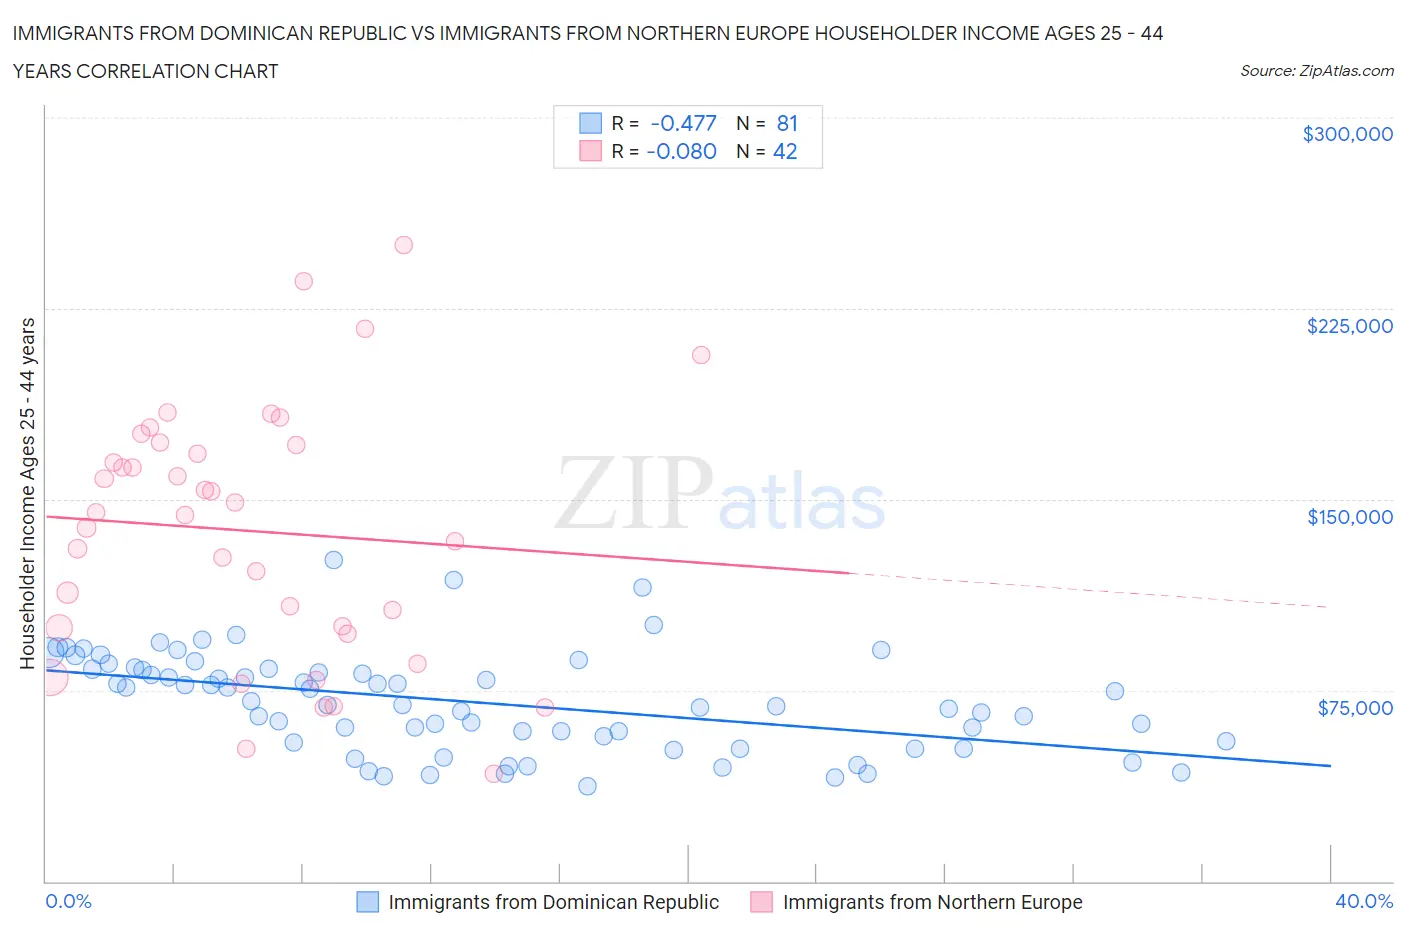 Immigrants from Dominican Republic vs Immigrants from Northern Europe Householder Income Ages 25 - 44 years